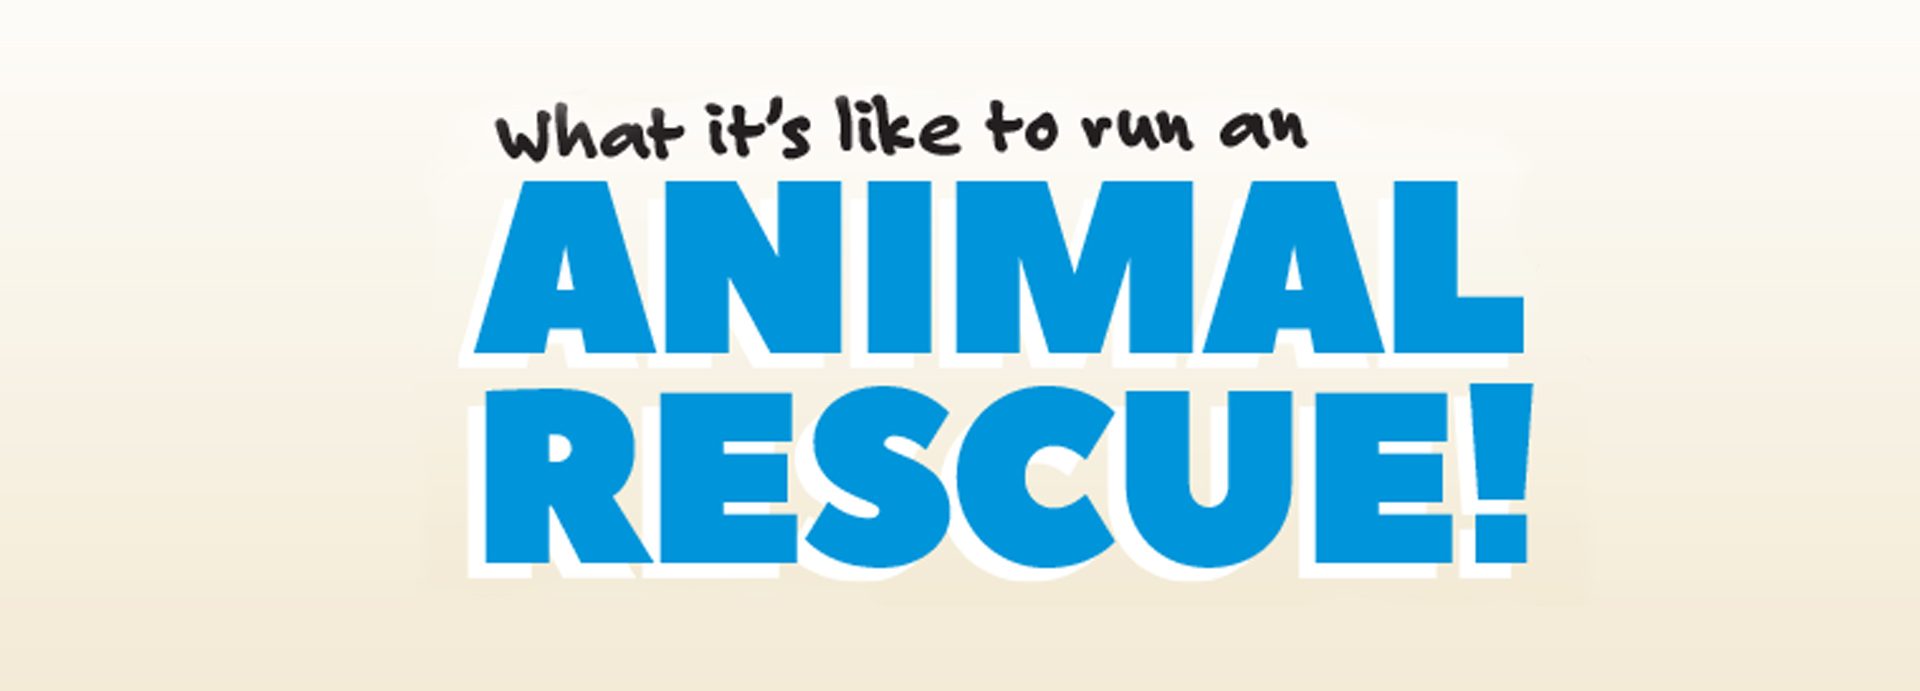 What it's like to run an animal rescue!